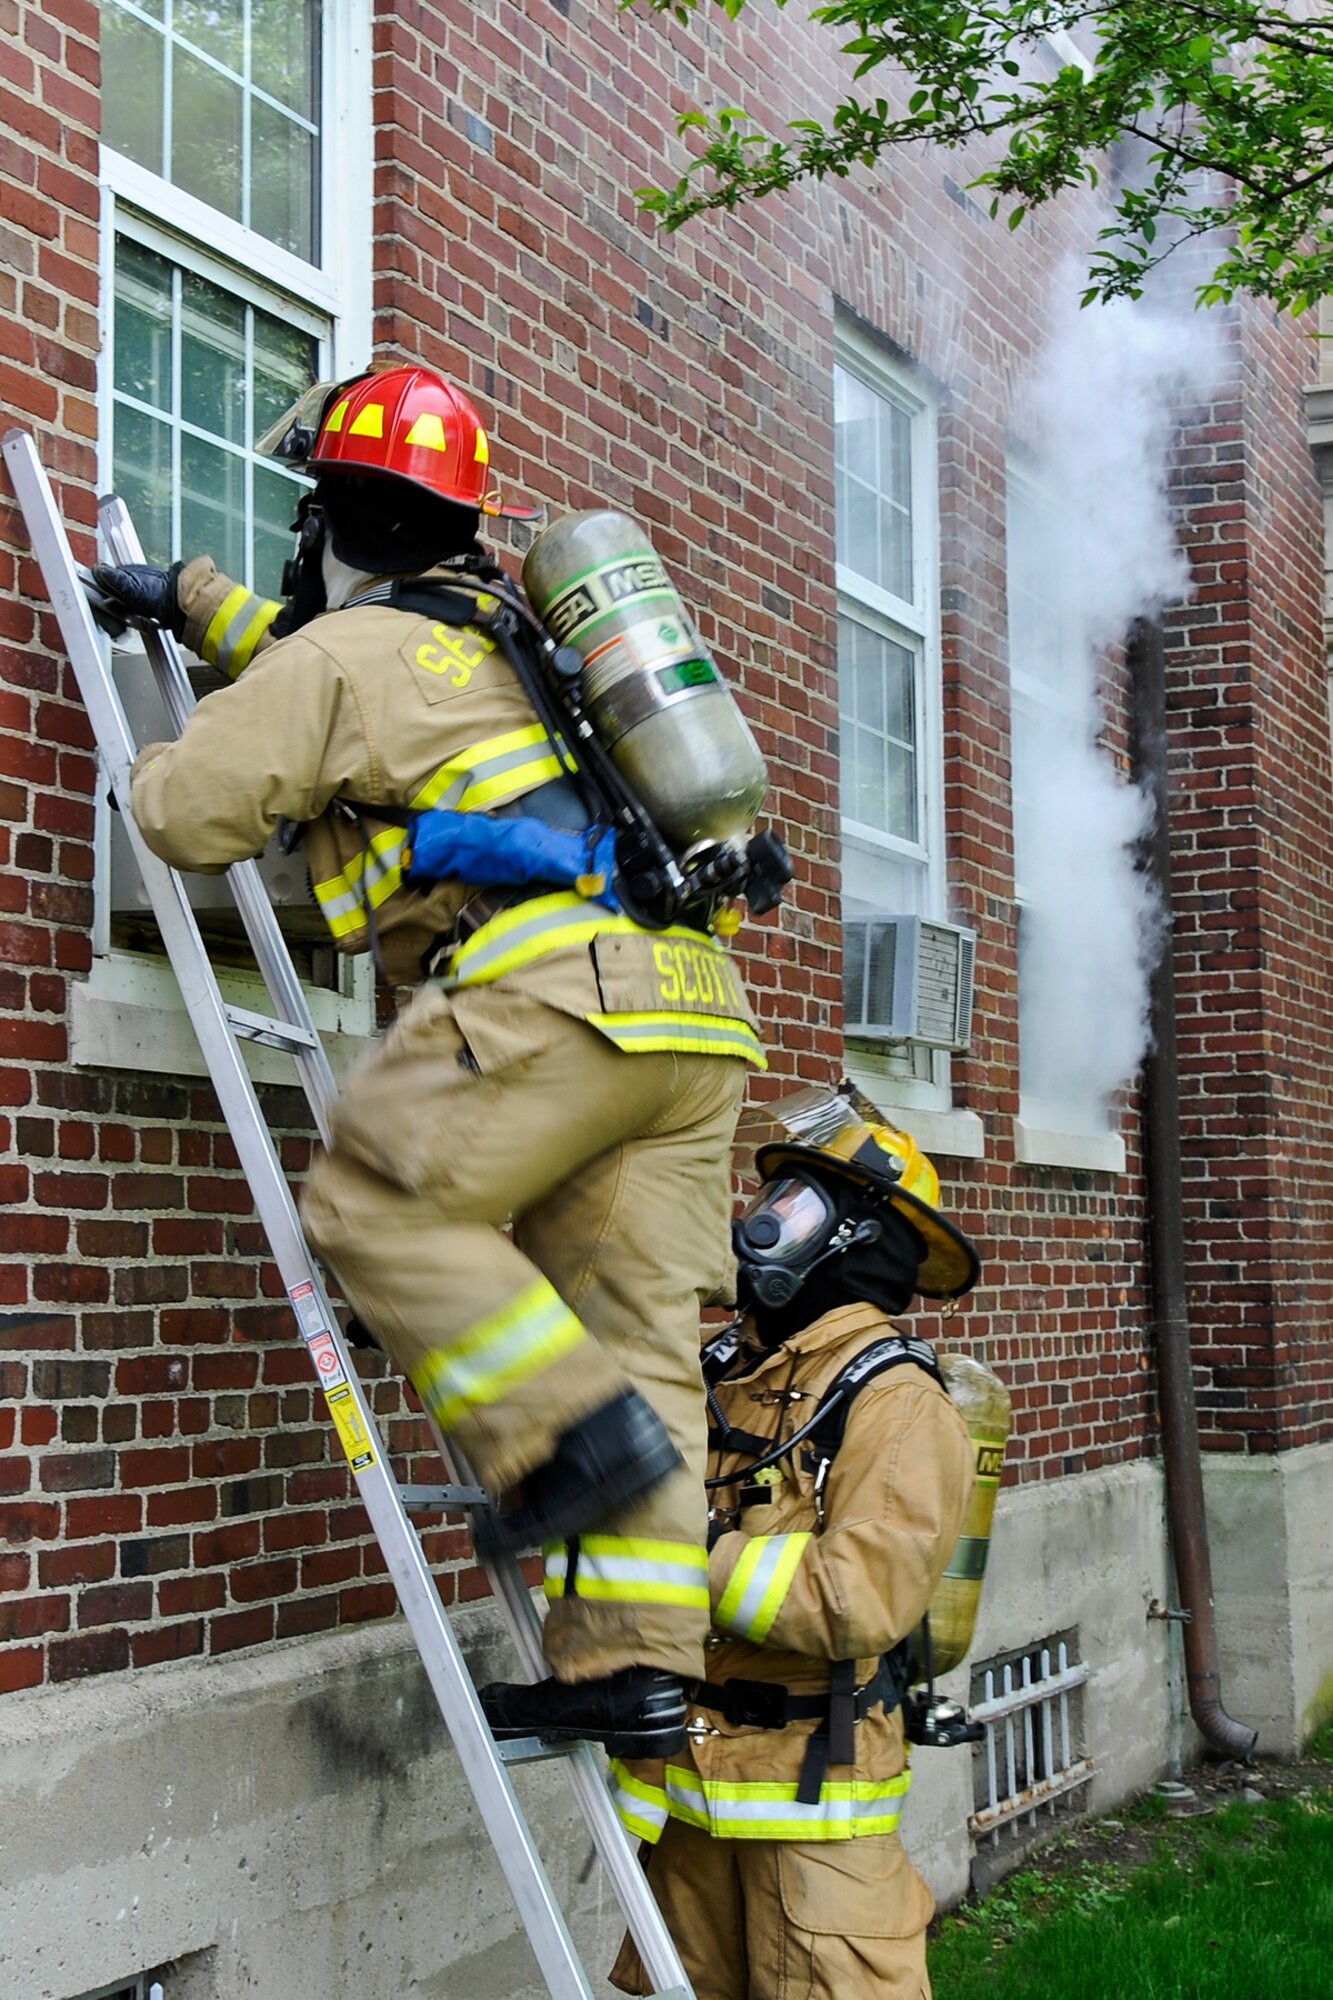 150605-Z-MI929-008 – Firefighters look into a building during a training exercise at Selfridge Air National Guard Base, Mich., June 5, 2015. During the exercise, a smoke machine was used to create a simulated cloud of chlorine gas after an industrial accident. Firefighters and other base personnel trained in the steps necessary to respond to such an emergency. Airmen at Selfridge conduct a variety of training exercises every year to be able to respond to local emergencies and/or to deploy to forward locations. (U.S. Air National Guard photo by Terry Atwell)